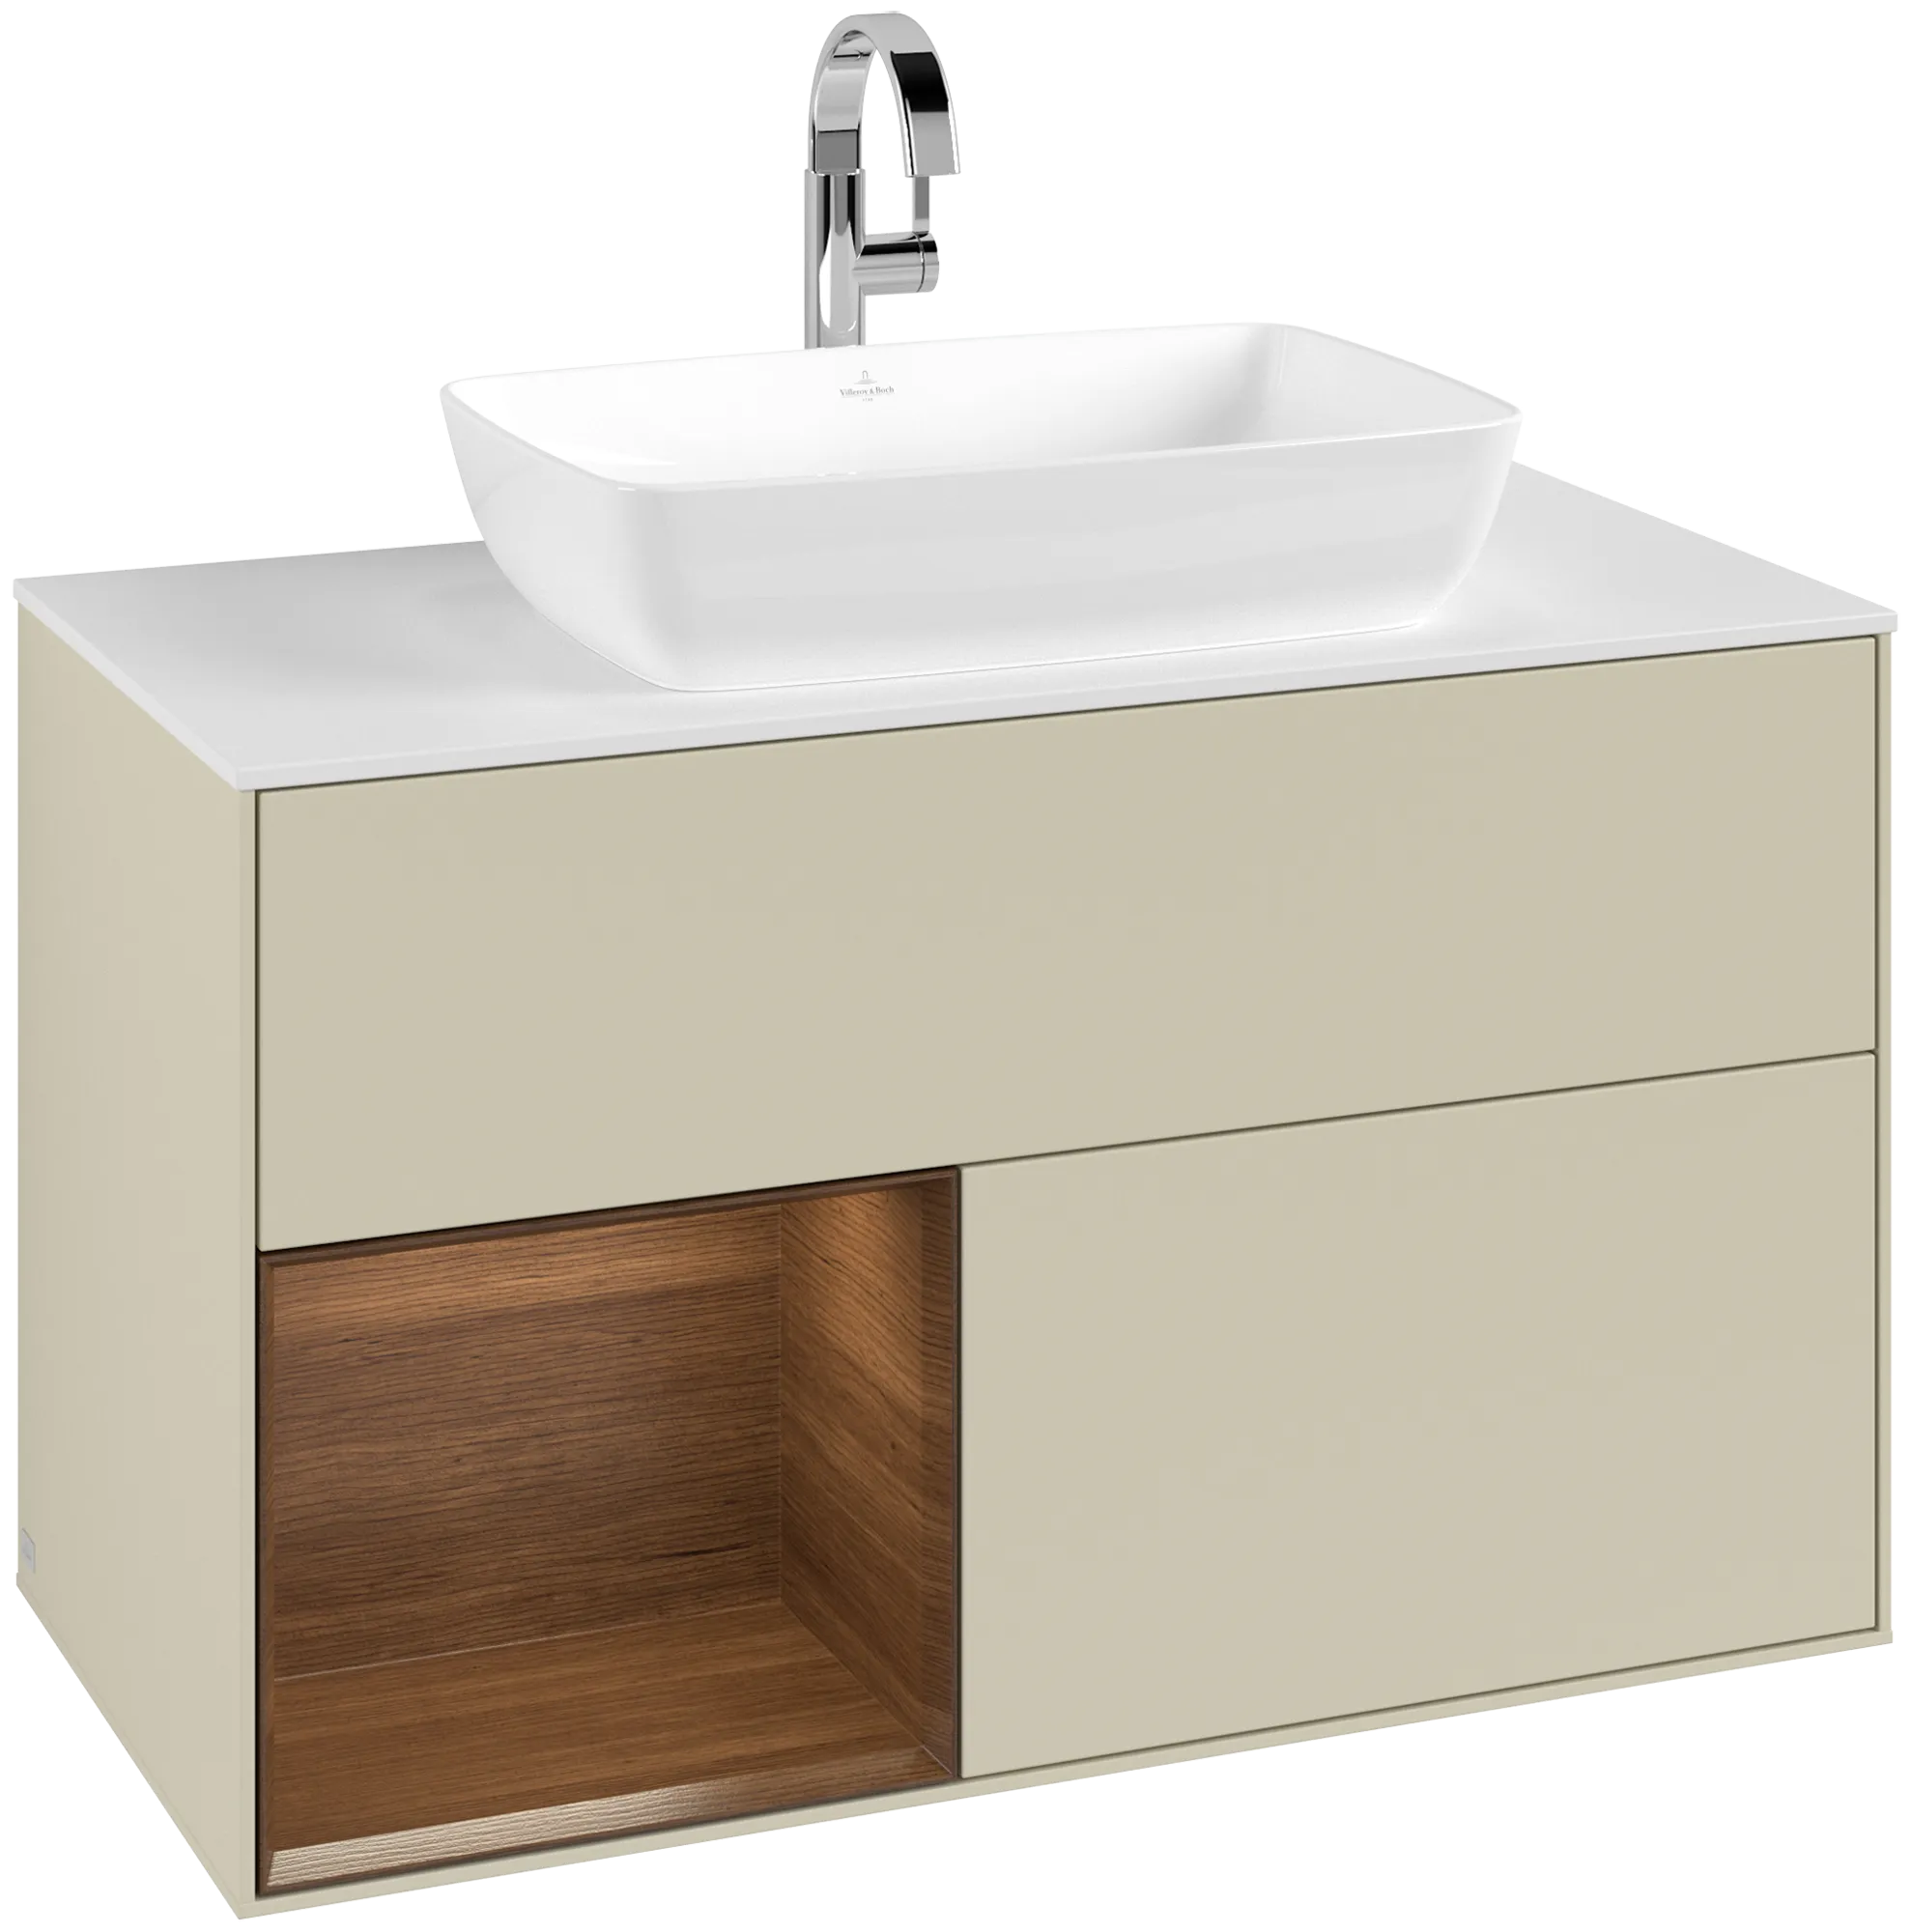 Picture of VILLEROY BOCH Finion Vanity unit, with lighting, 2 pull-out compartments, 1000 x 603 x 501 mm, Silk Grey Matt Lacquer / Walnut Veneer / Glass White Matt #G771GNHJ